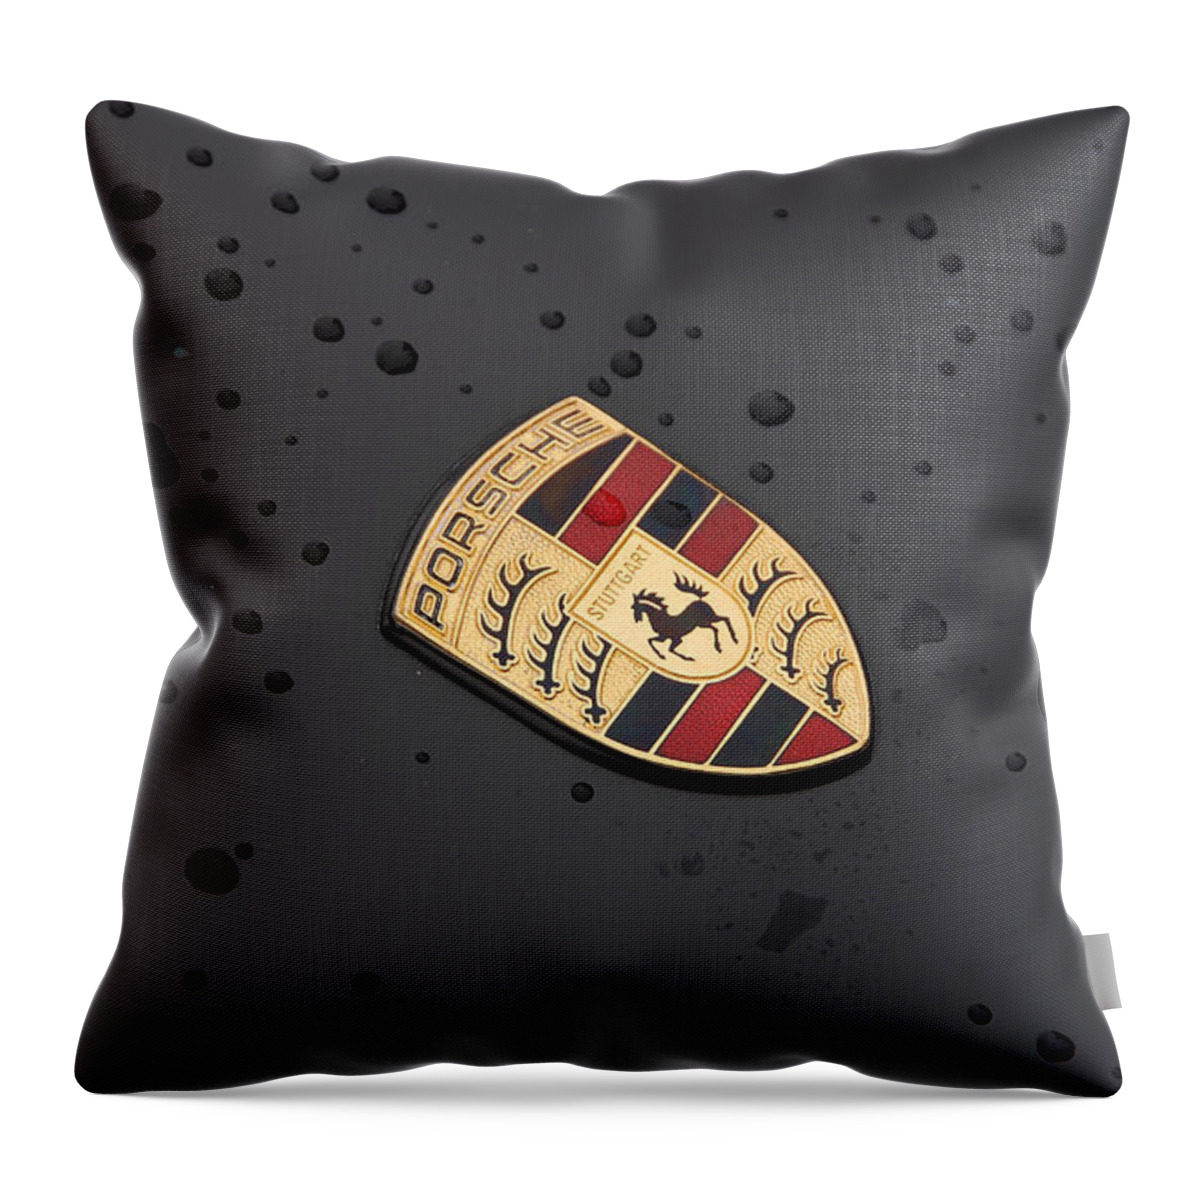 Automobiles Throw Pillow featuring the photograph Drizzle by John Schneider